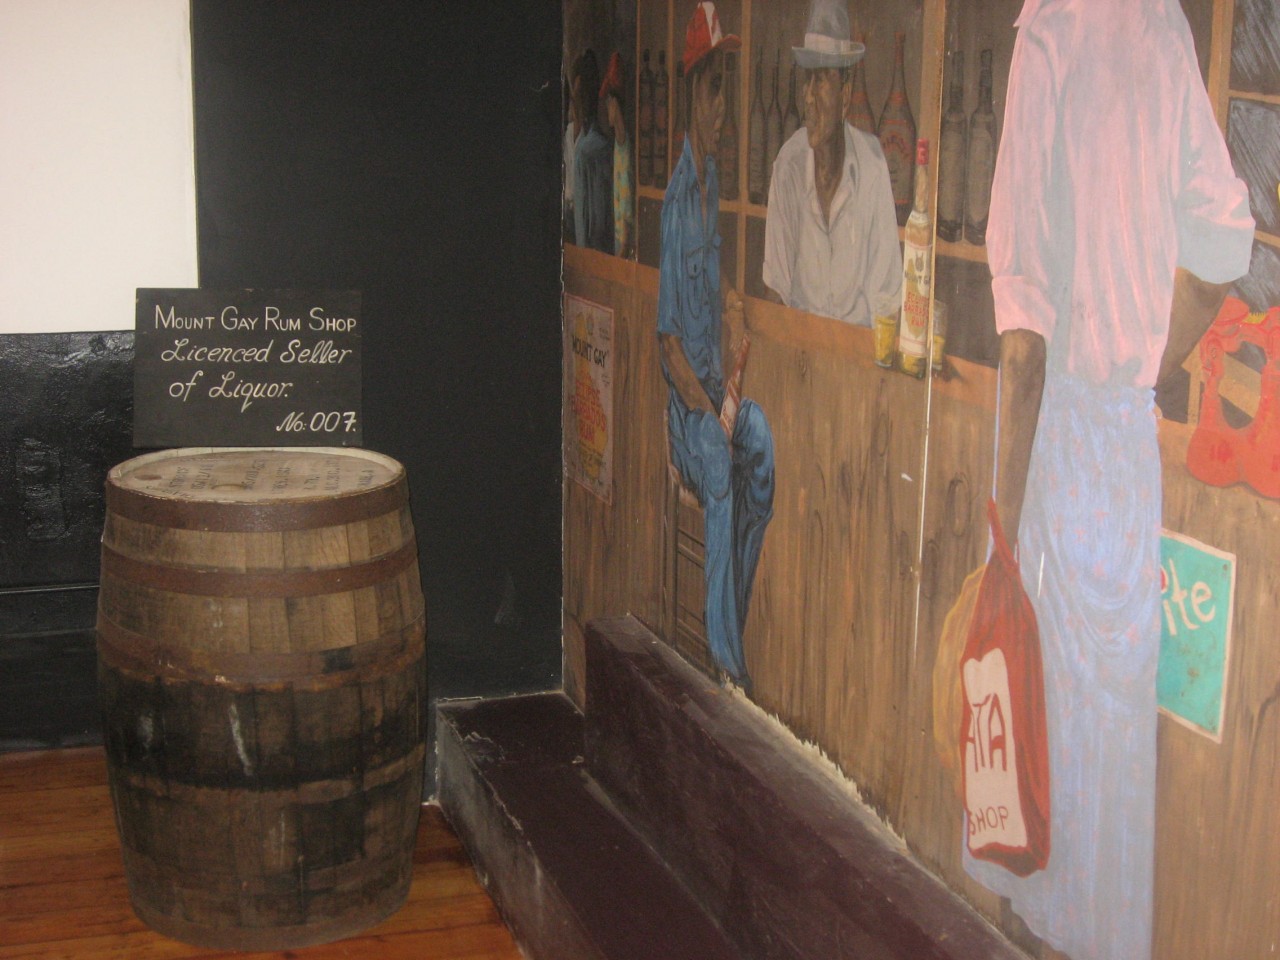 Tour the Mount Gay Rum Factory